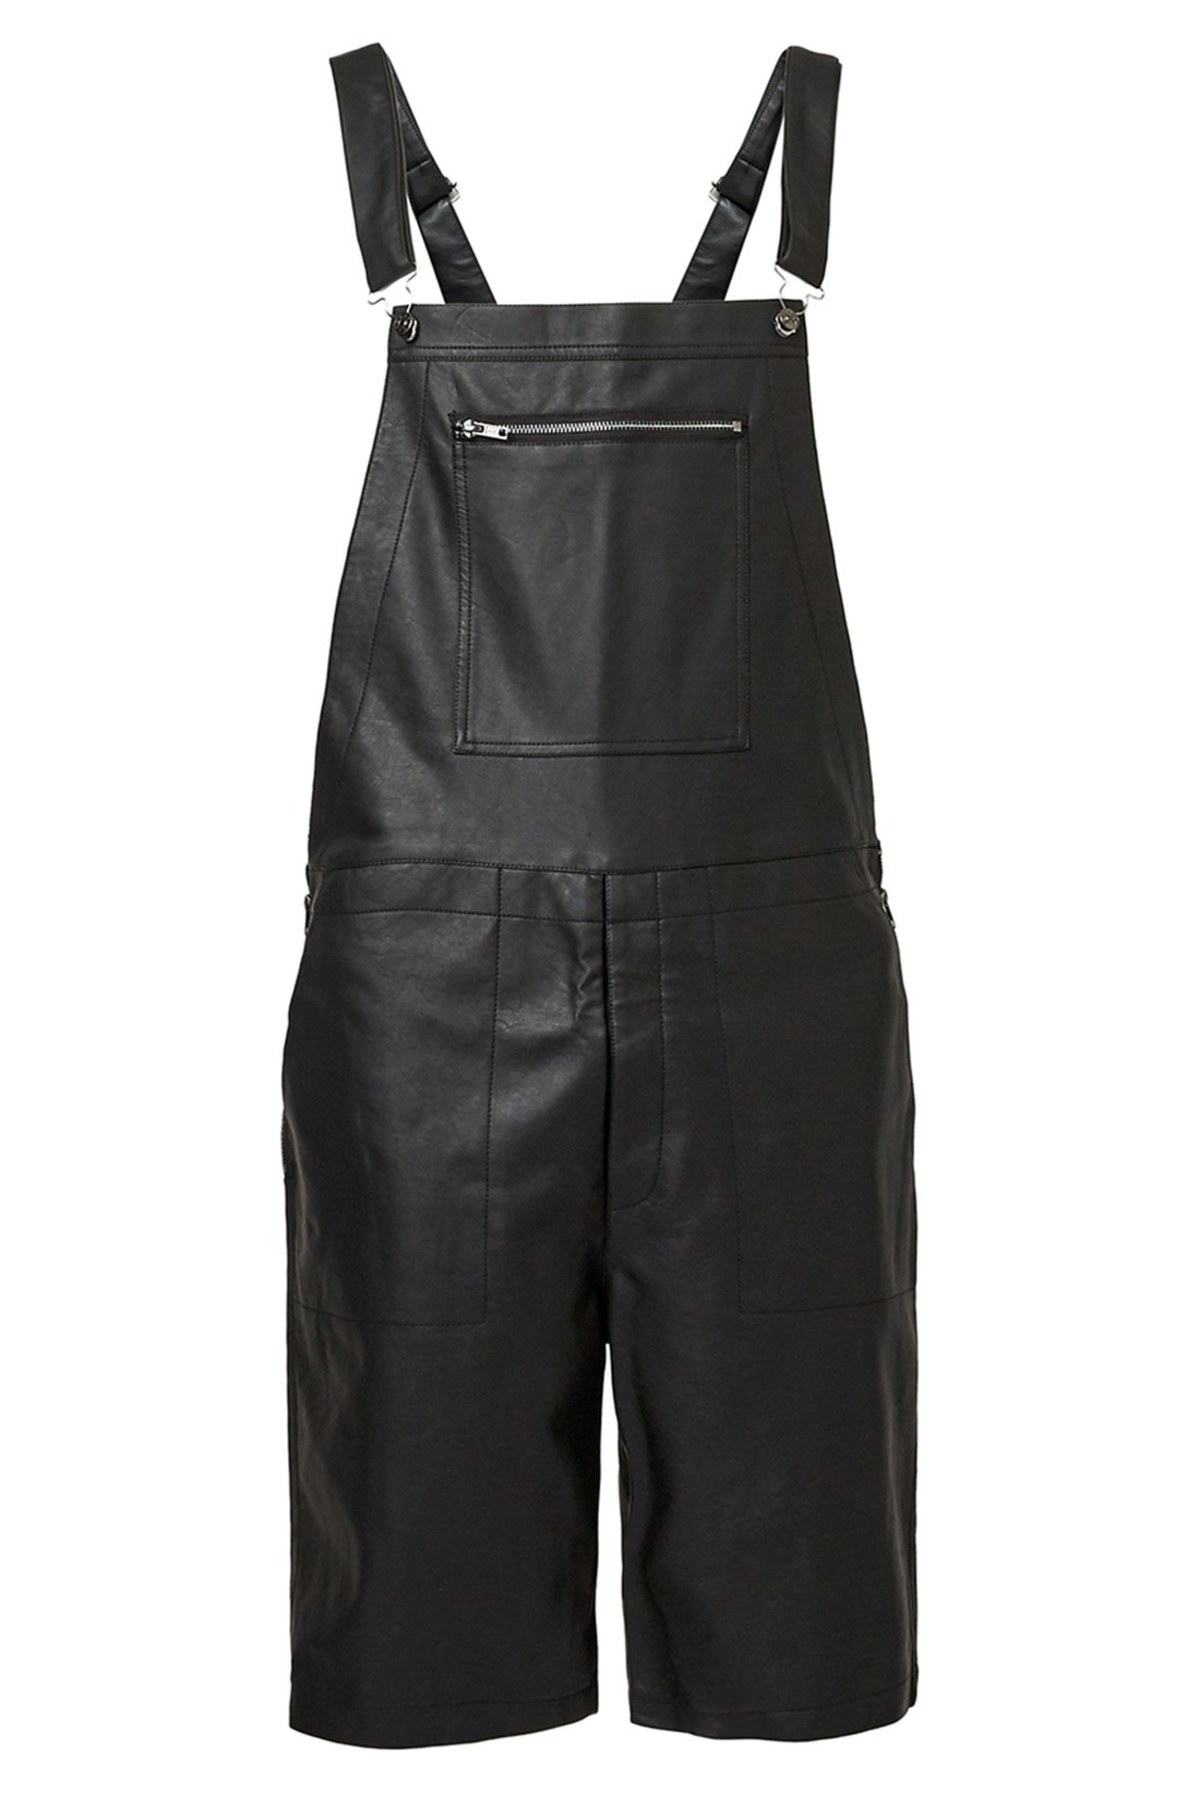 TOPMAN Aaa Collection Faux Leather Short Overalls in Black for Men | Lyst